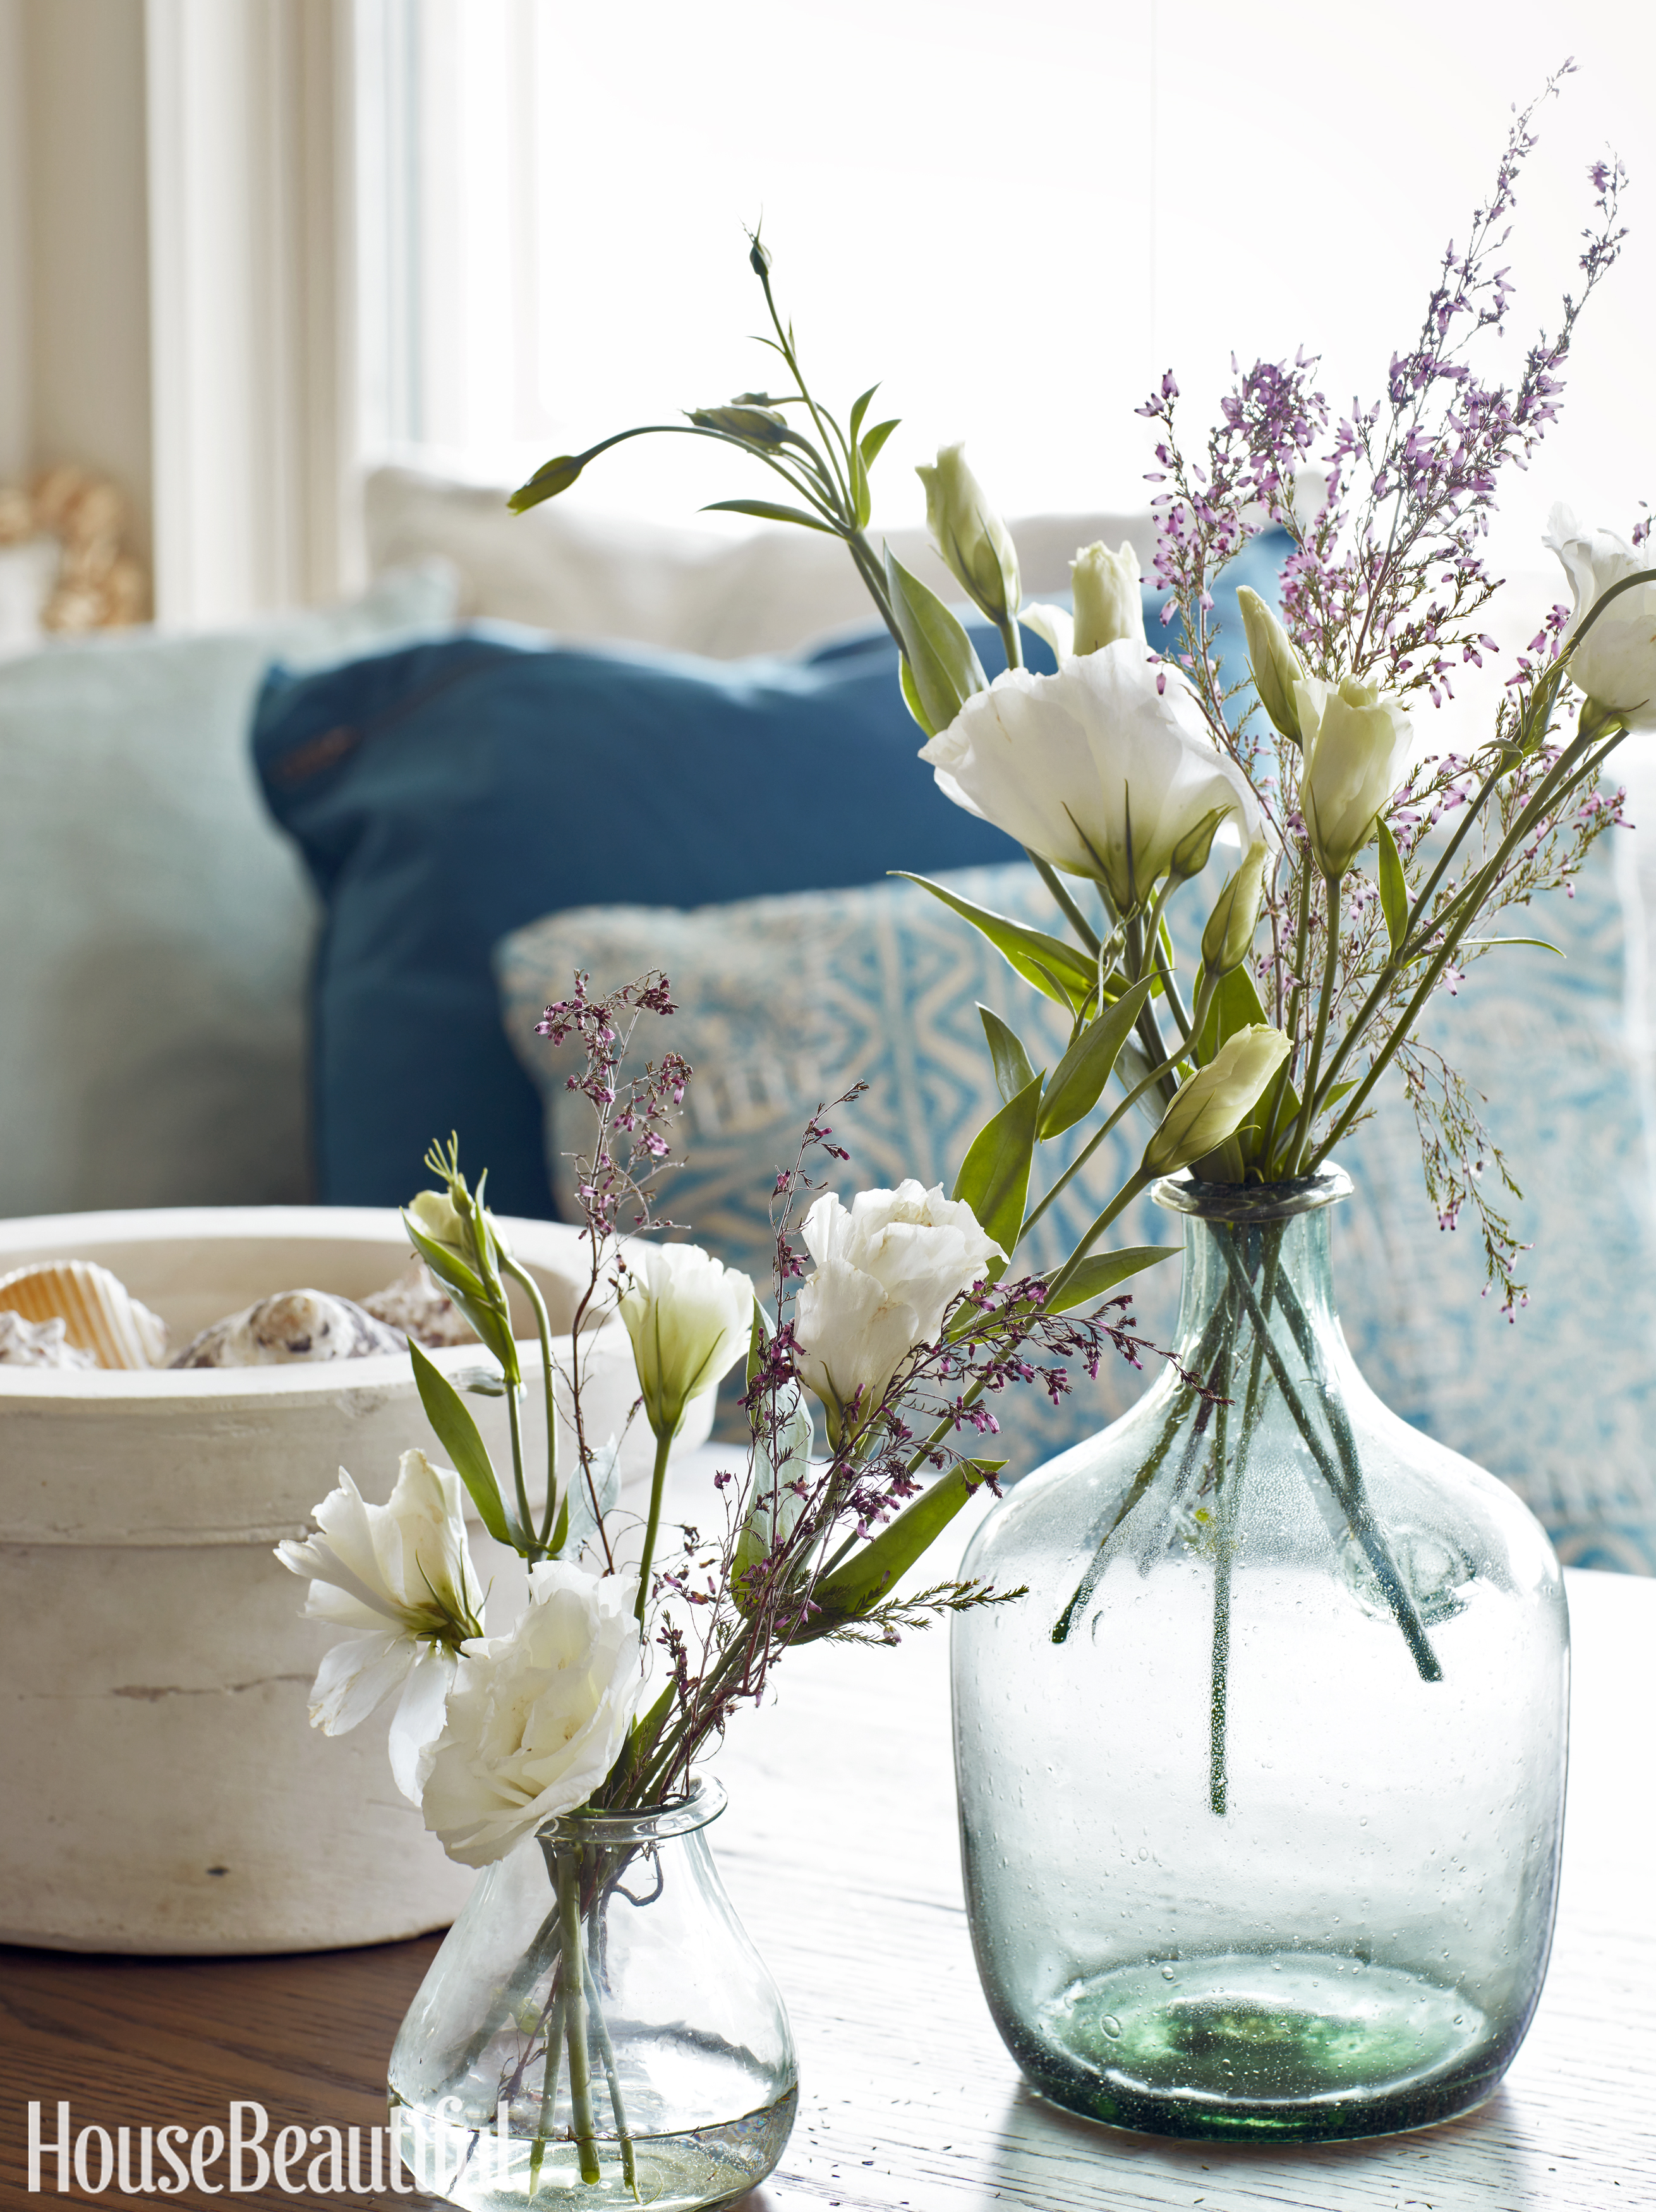 10 Creative Ways to Add Spring Flowers to Your Home Design